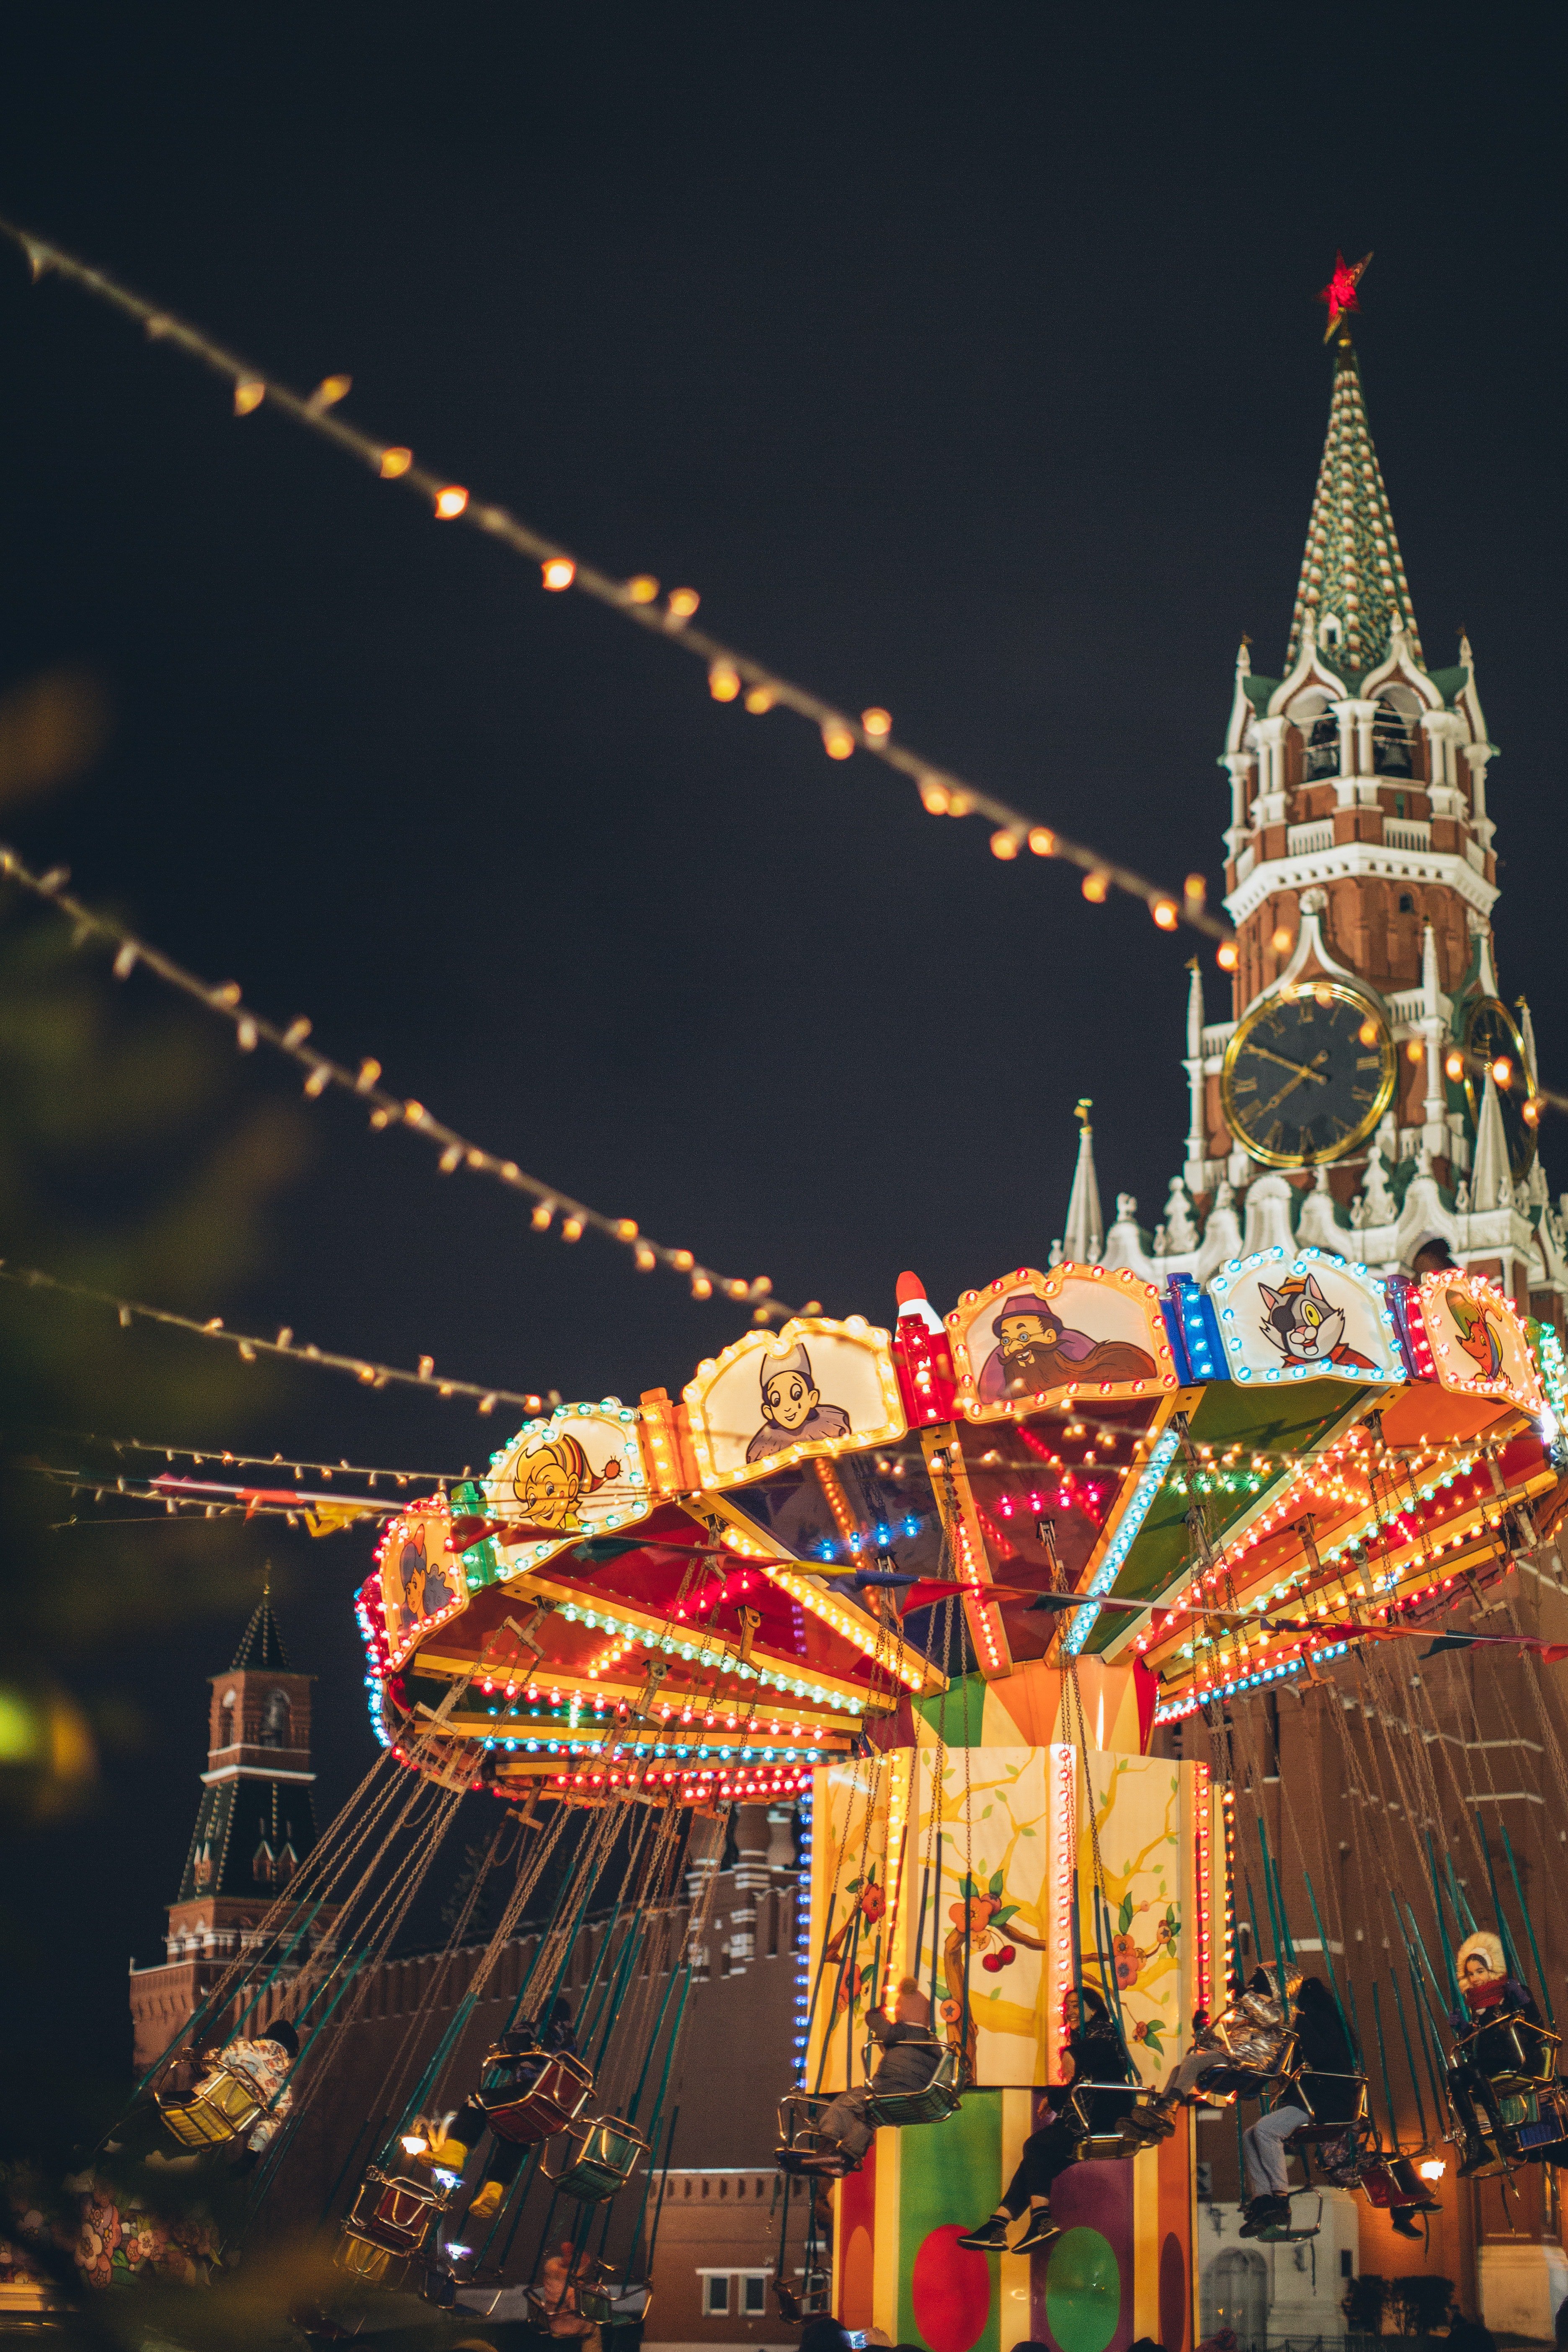 Mike enjoyed to his fullest at the amusement park. | Source: Pexels